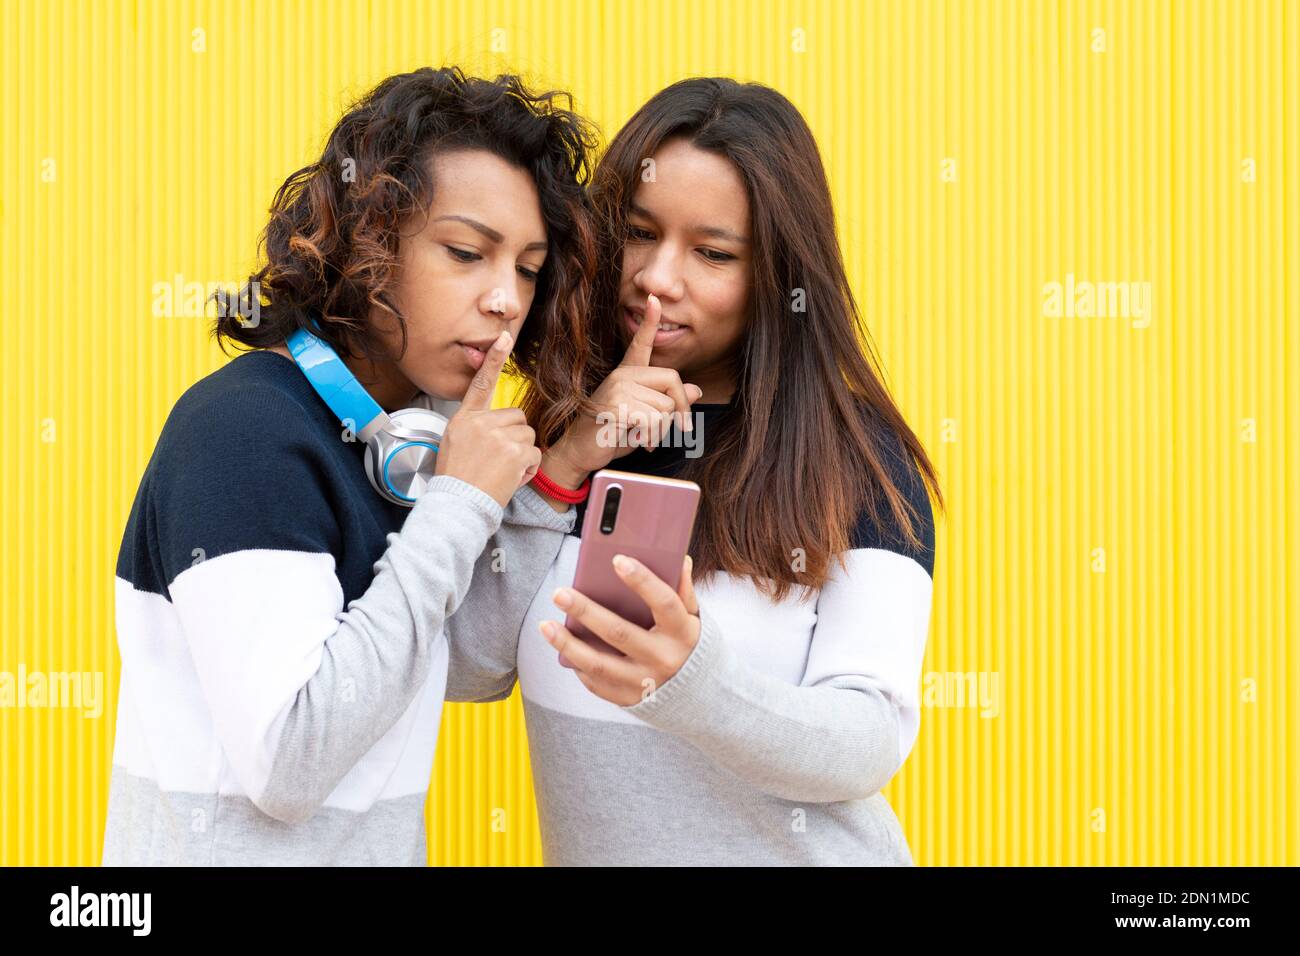 Portrait of two brown girls on a yellow background. Both are making the gesture of asking for silence while looking at a smart phone. Space for text. Stock Photo